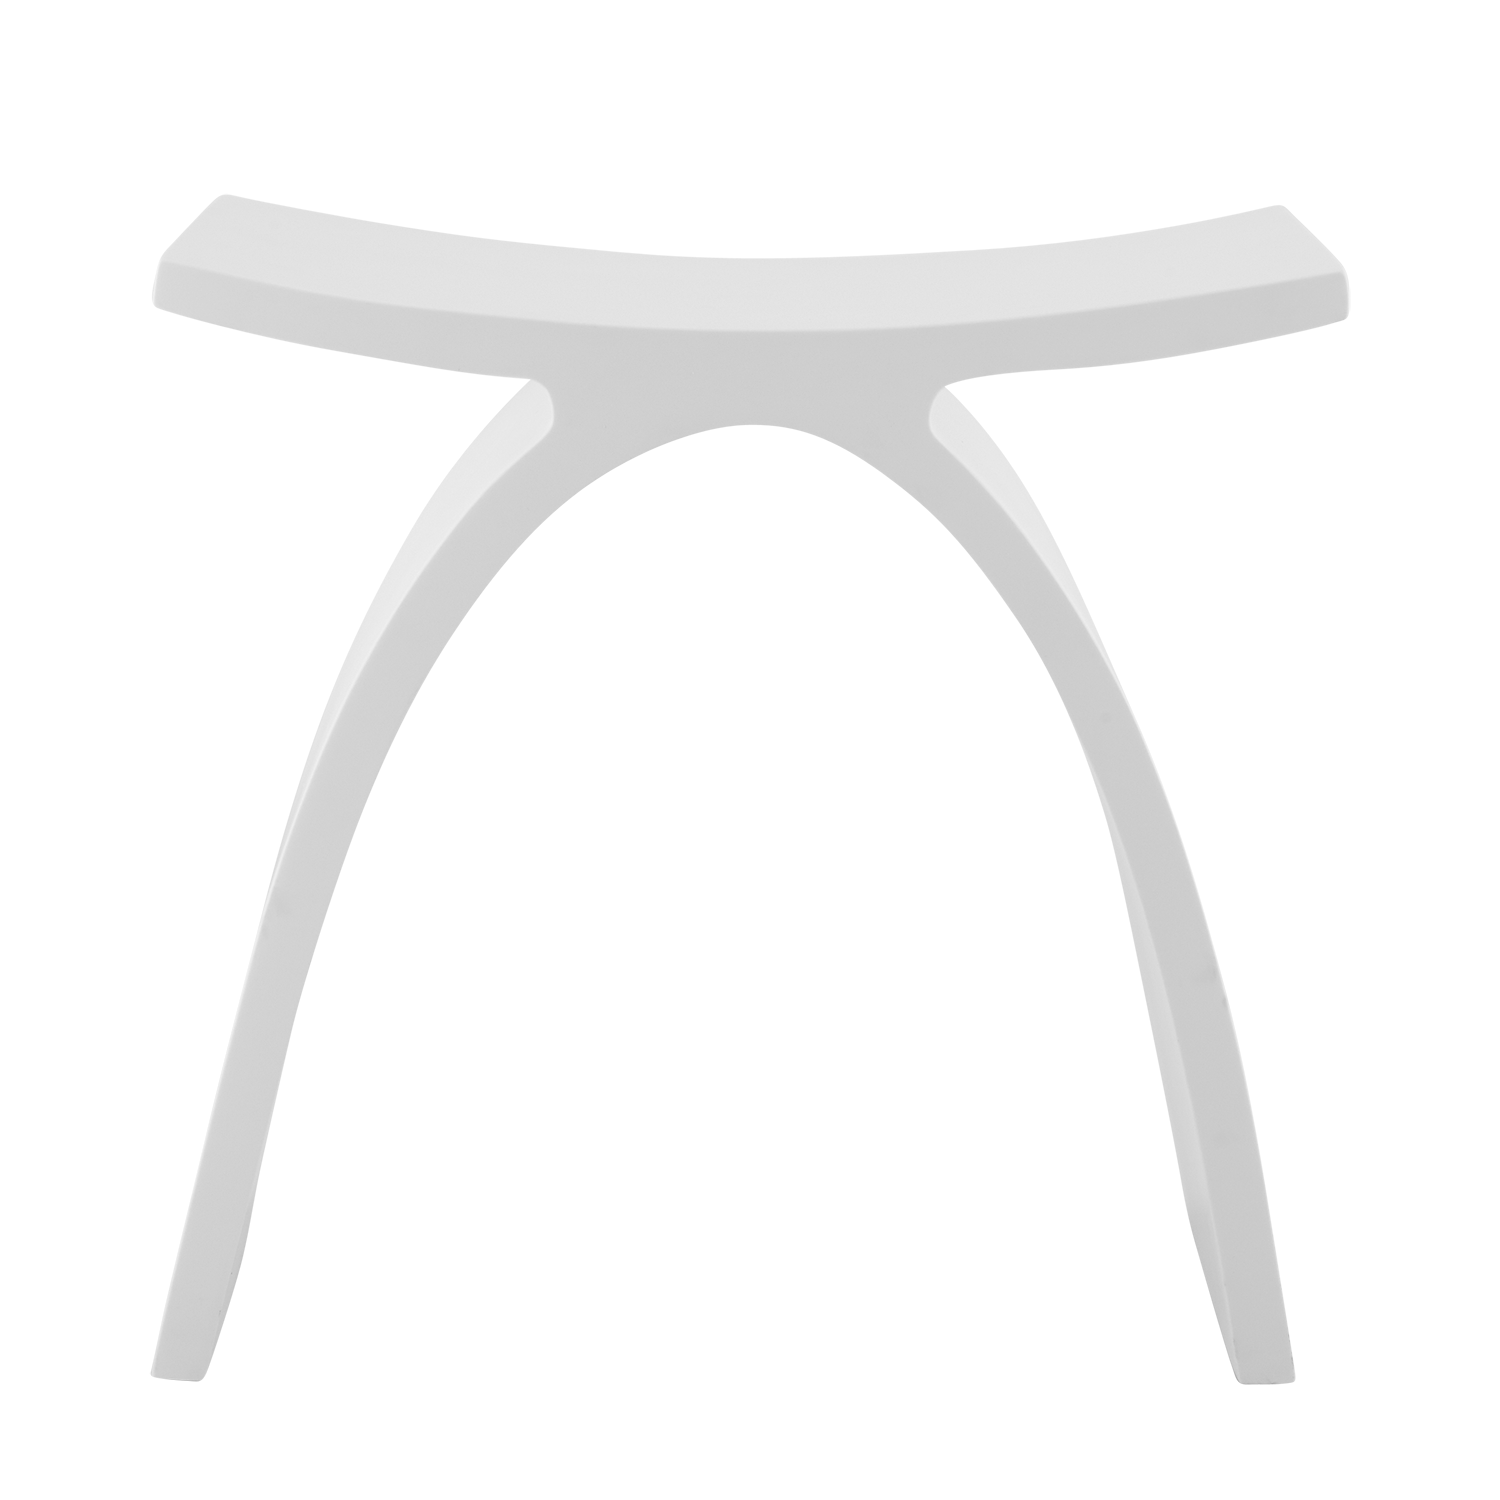 DAX Solid Surface Shower Stool, Standfree, Matte White Finish, 16-3/4 x 16-3/4 x 9-1/16 Inches (DAX-ST-01)